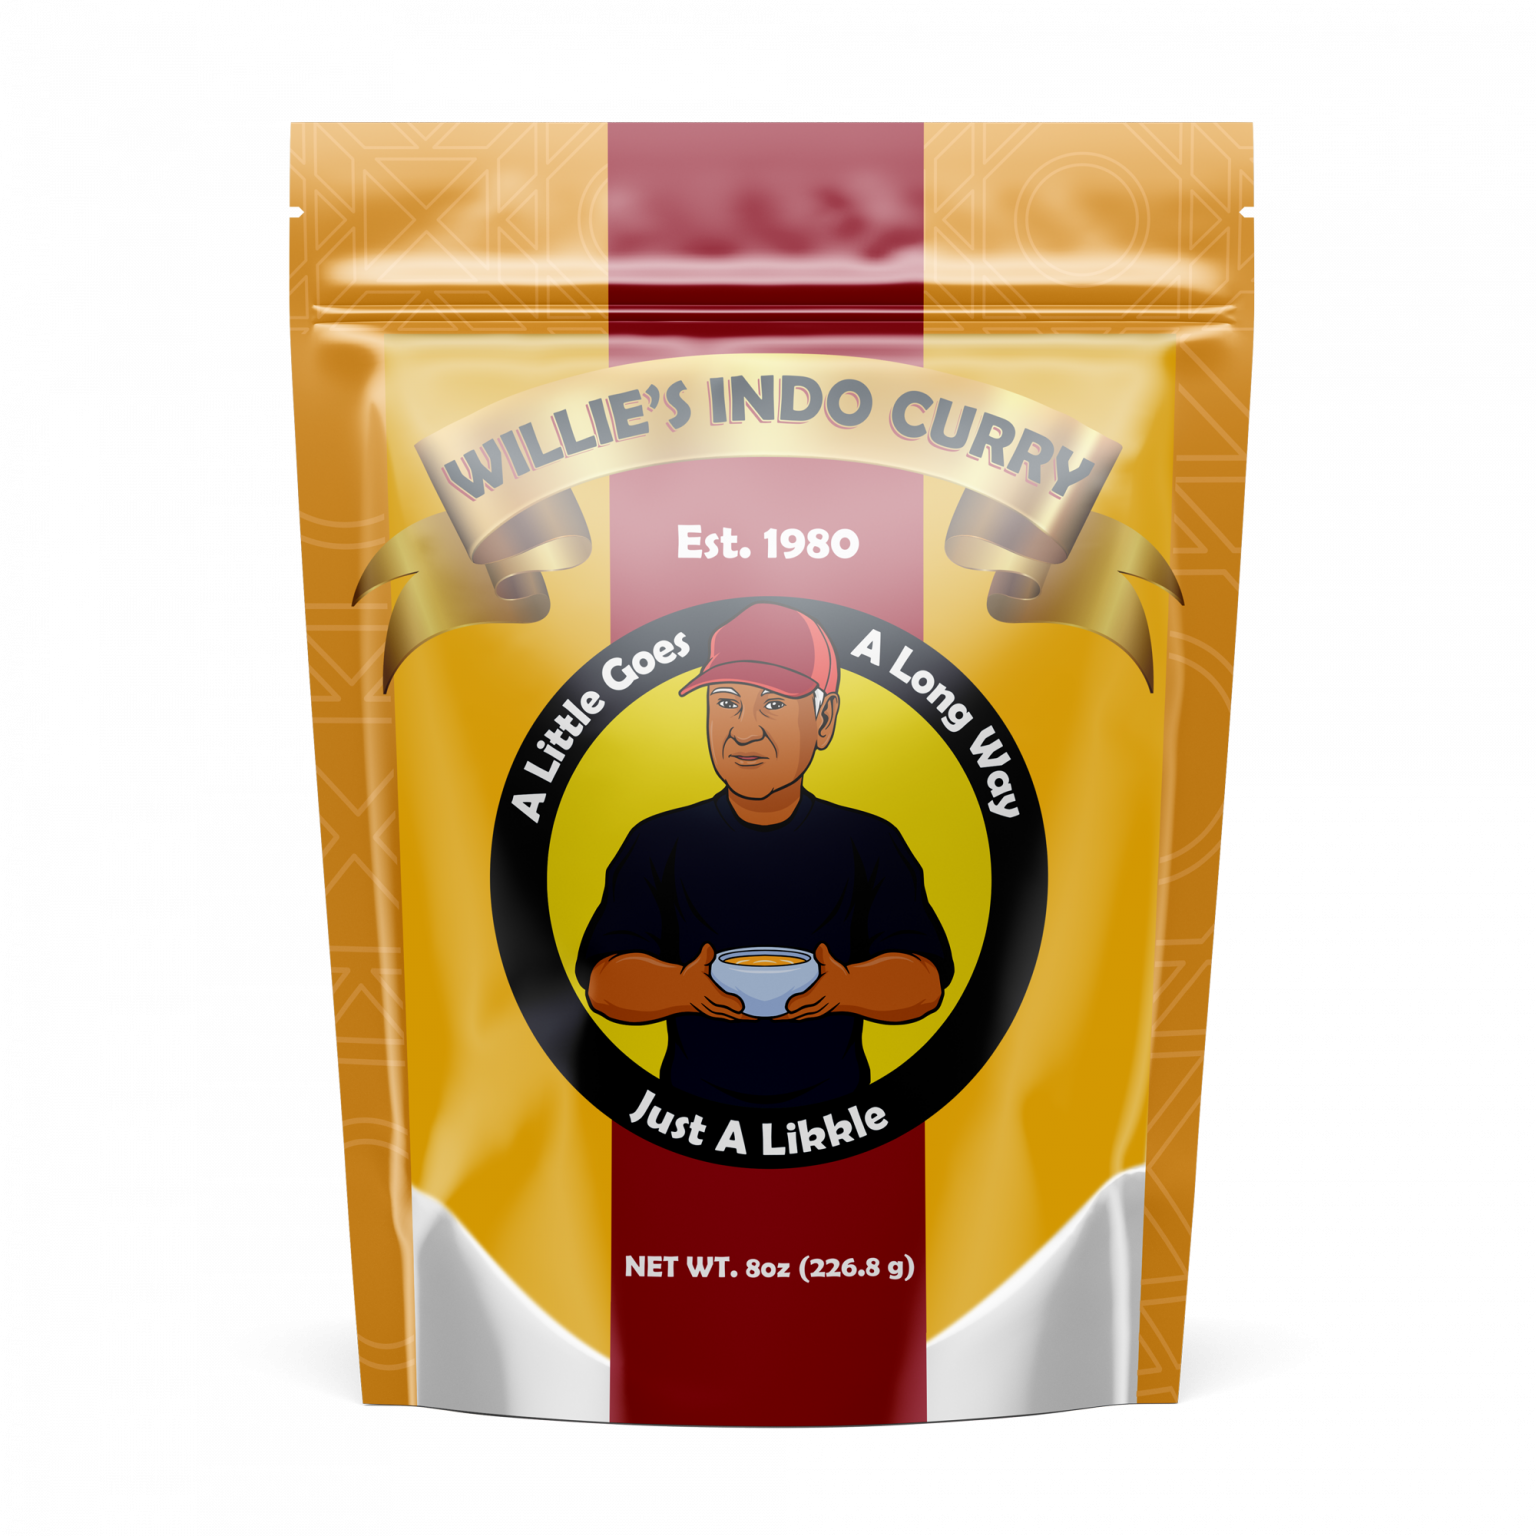 Willies-Indo-Curry-8oz